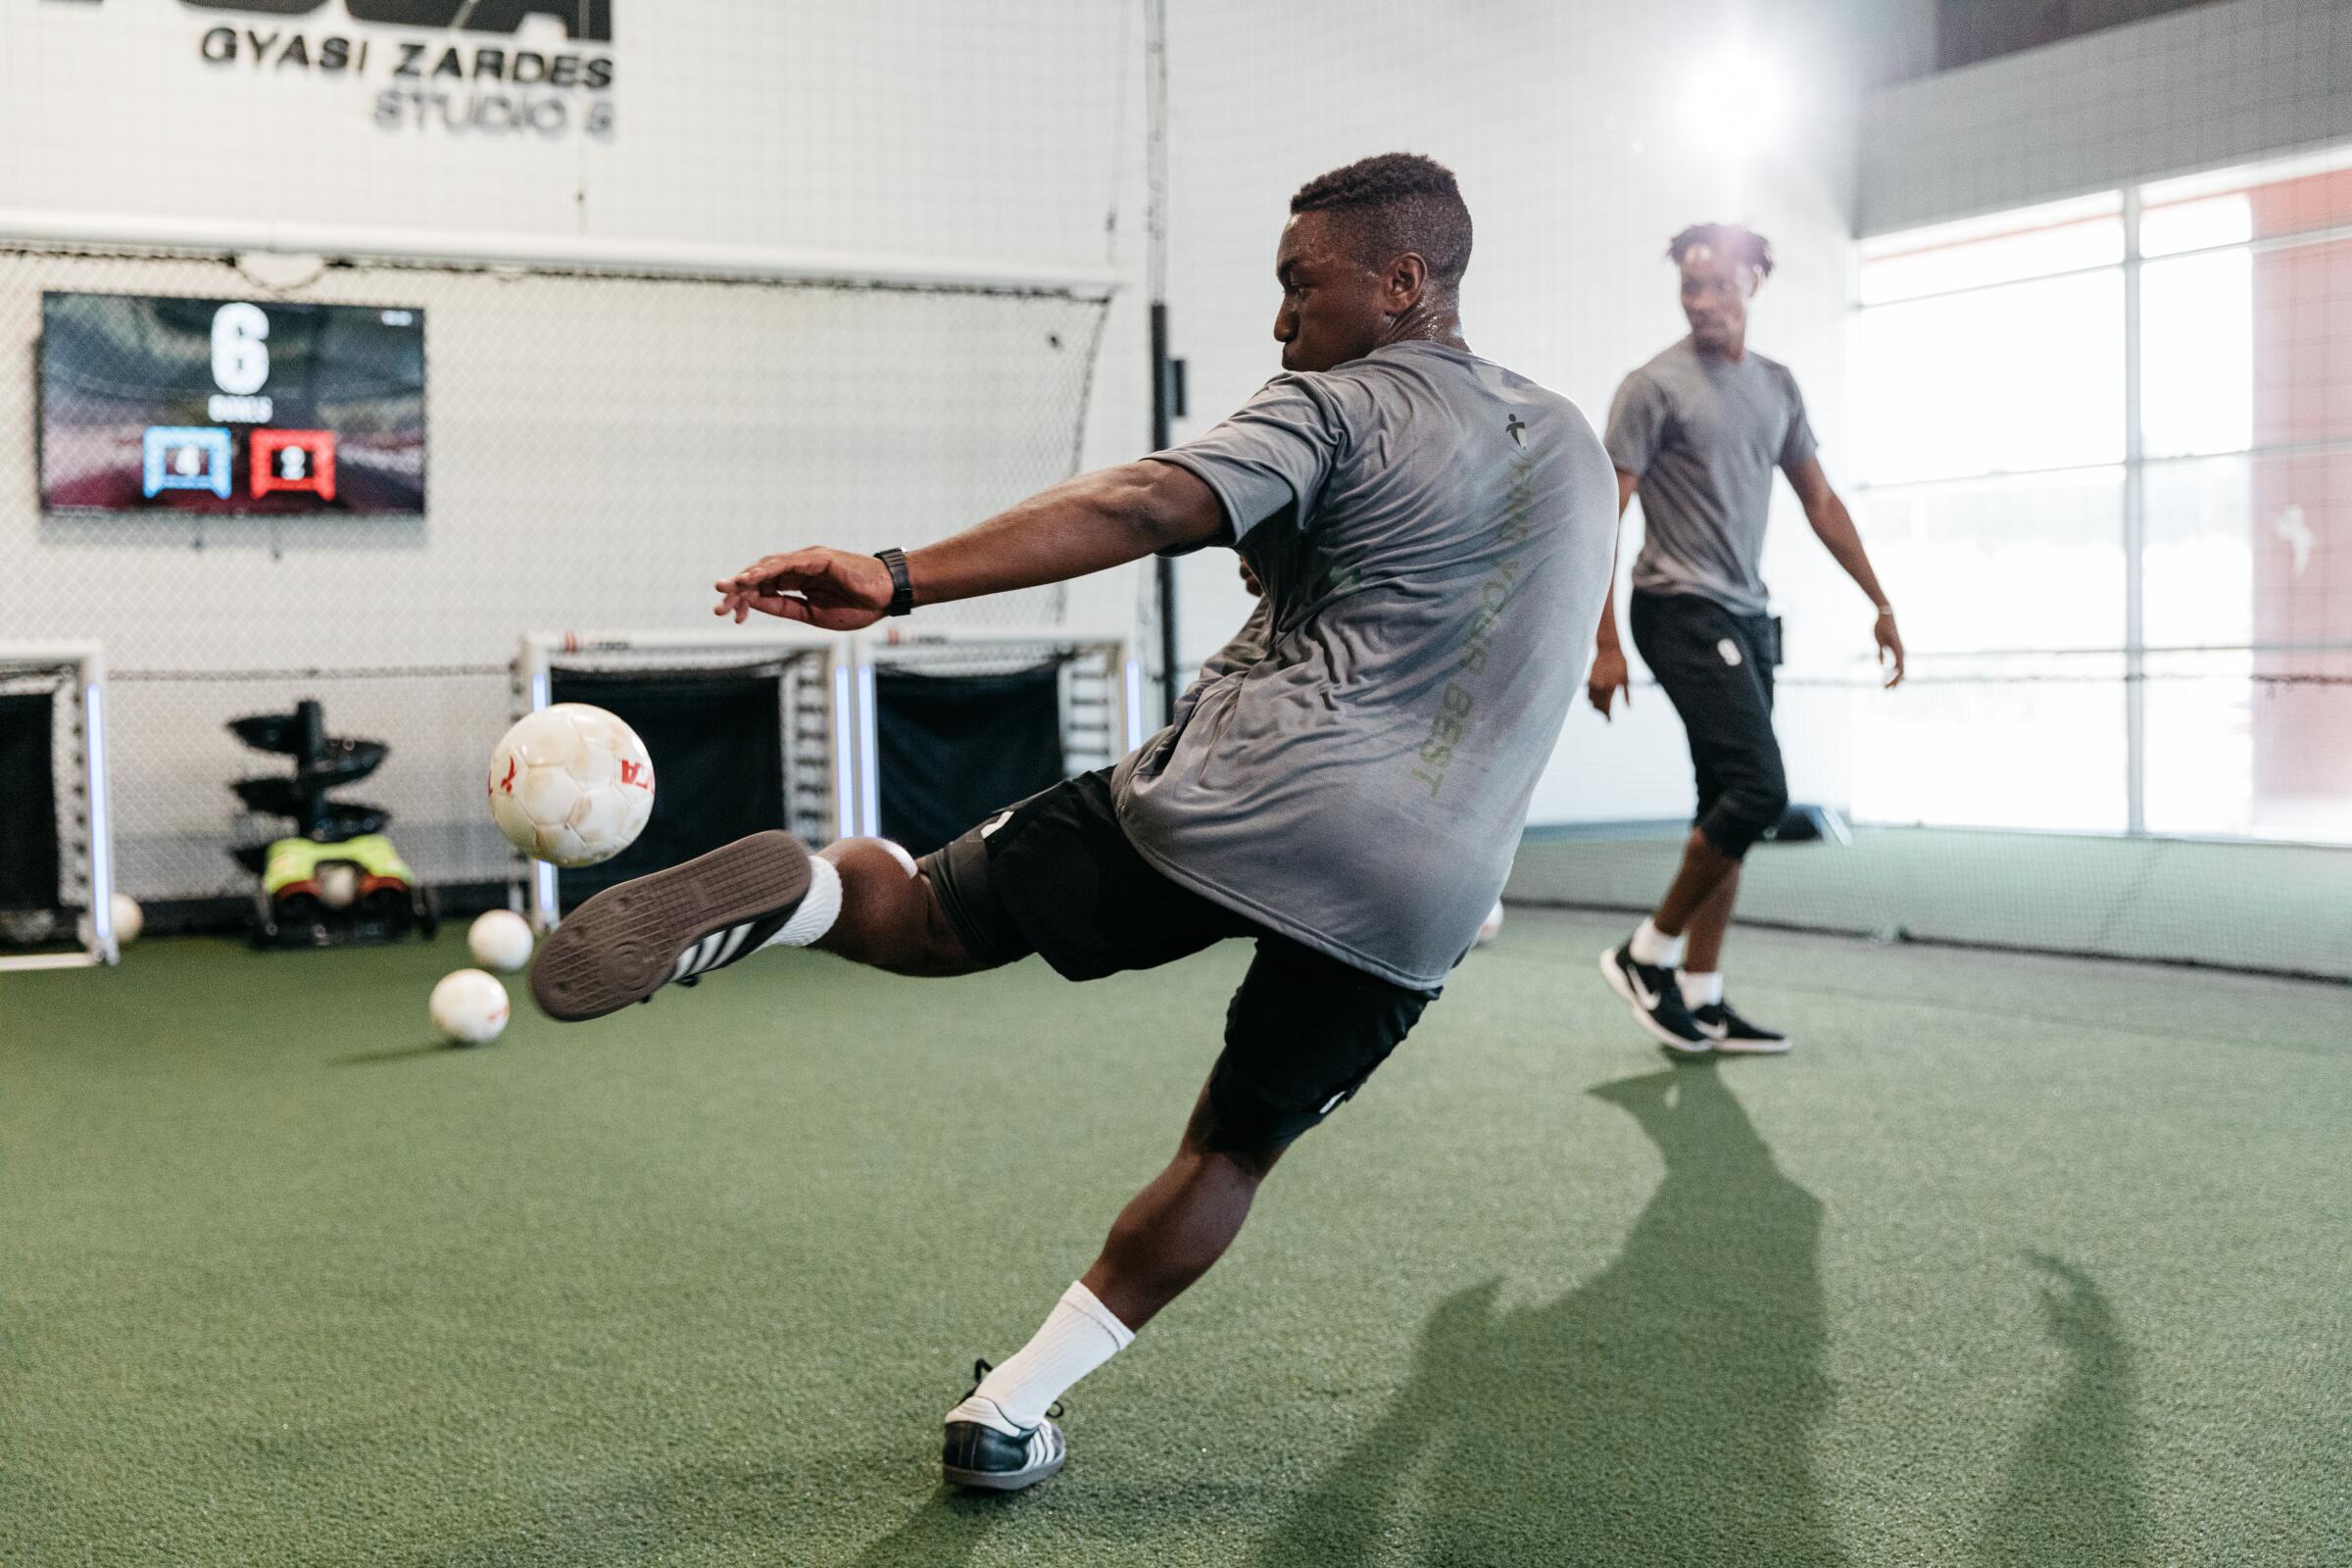 A soccer player takes a volley from the TOCA Touch Trainer at TOCA Football’s training facility in Costa Mesa.